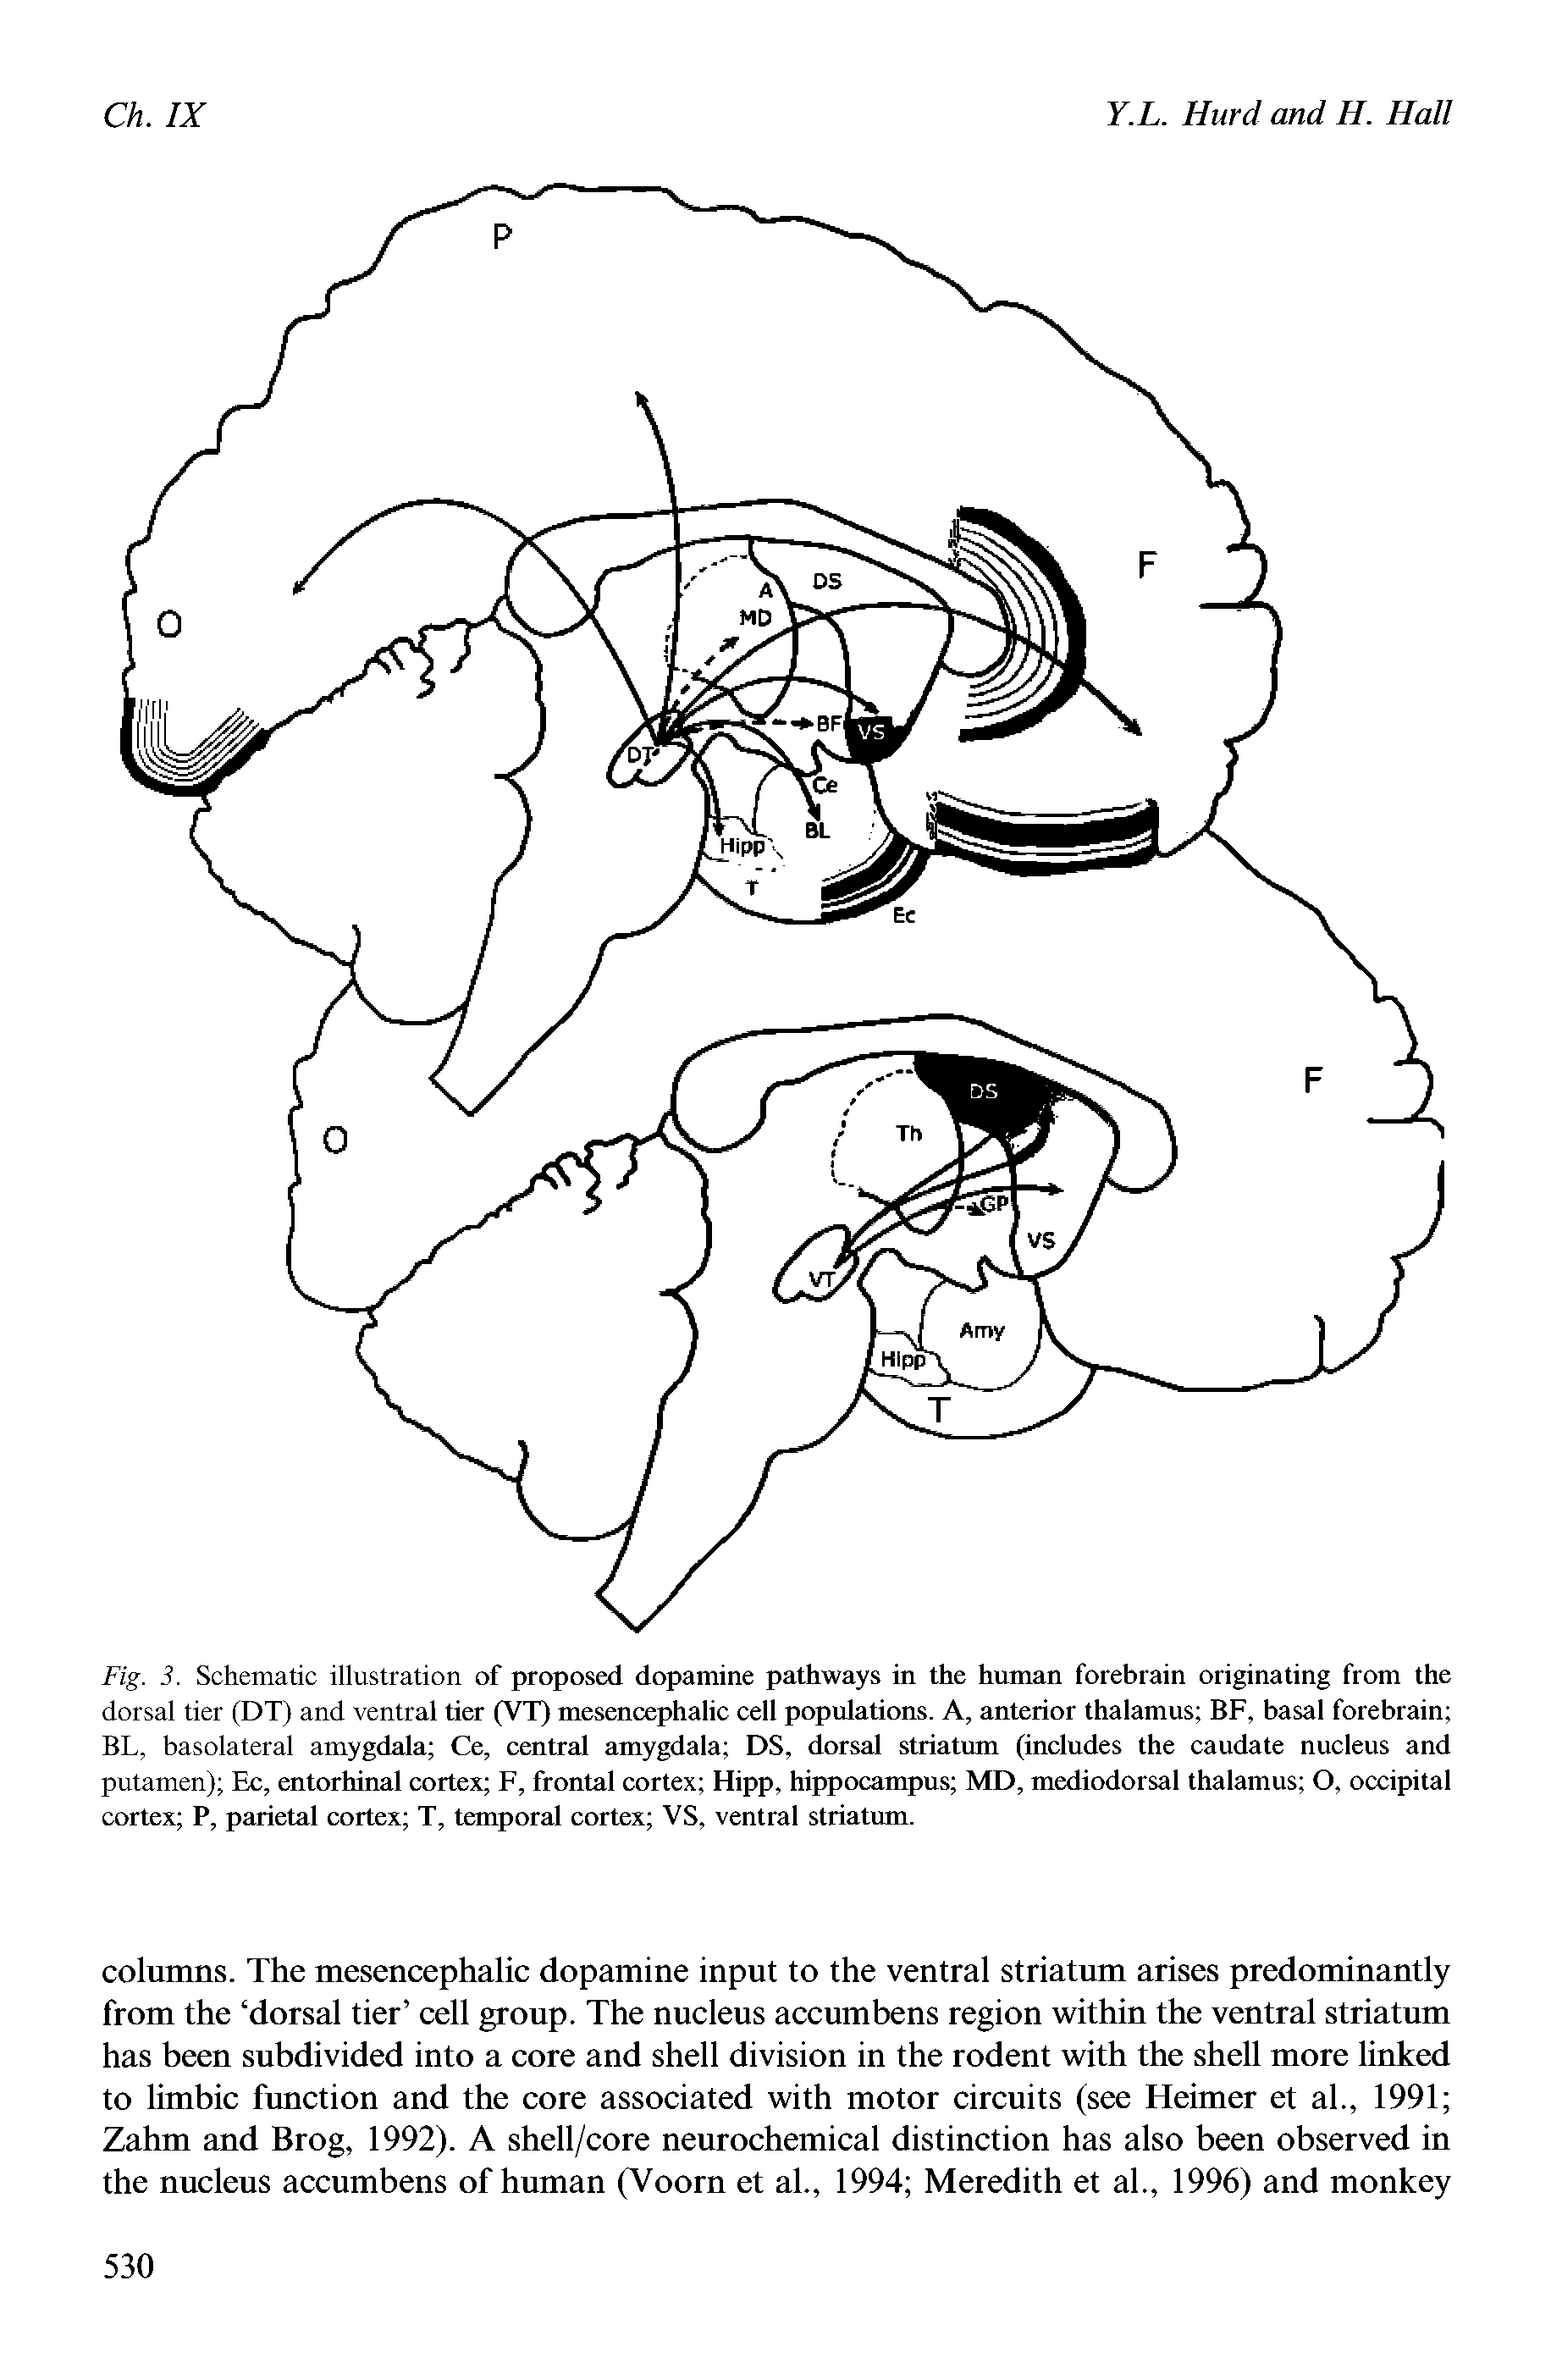 Fig. 3. Schematic illustration of proposed dopamine pathways in the human forebrain originating from the dorsal tier (DT) and ventral tier (VT) mesencephalic cell populations. A, anterior thalamus BF, basal forebrain BL, basolateral amygdala Ce, central amygdala DS, dorsal striatum (includes the caudate nucleus and putamen) Ec, entorhinal cortex F, frontal cortex Hipp, hippocampus MD, mediodorsal thalamus O, occipital cortex P, parietal cortex T, temporal cortex VS, ventral striatum.